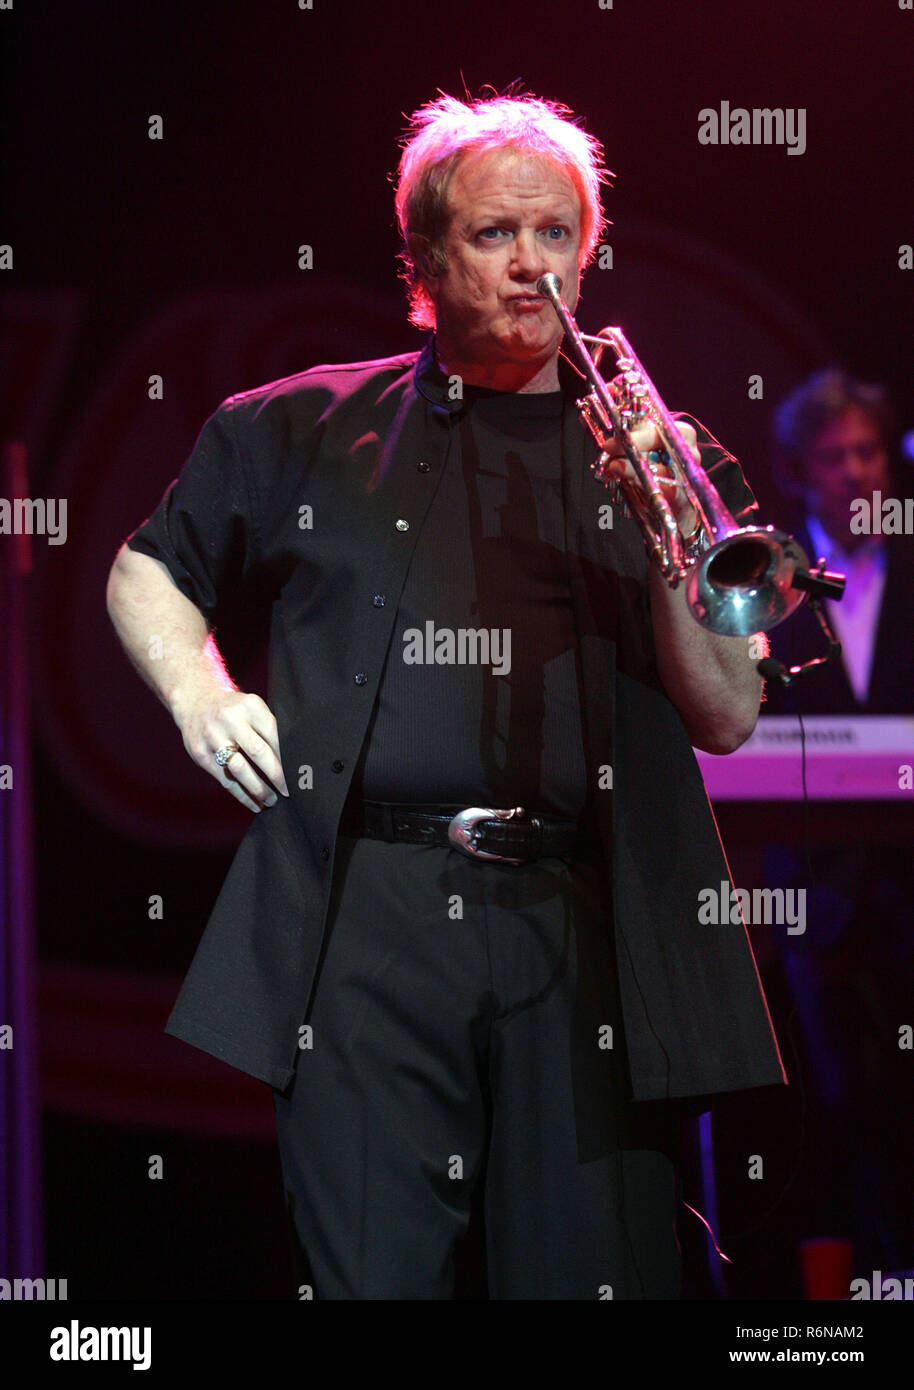 Lee Loughnane with Chicago performs in concert at the Seminole Hard Rock Hotel and Casino in Hollywood, Florida on April 7, 2009. Stock Photo